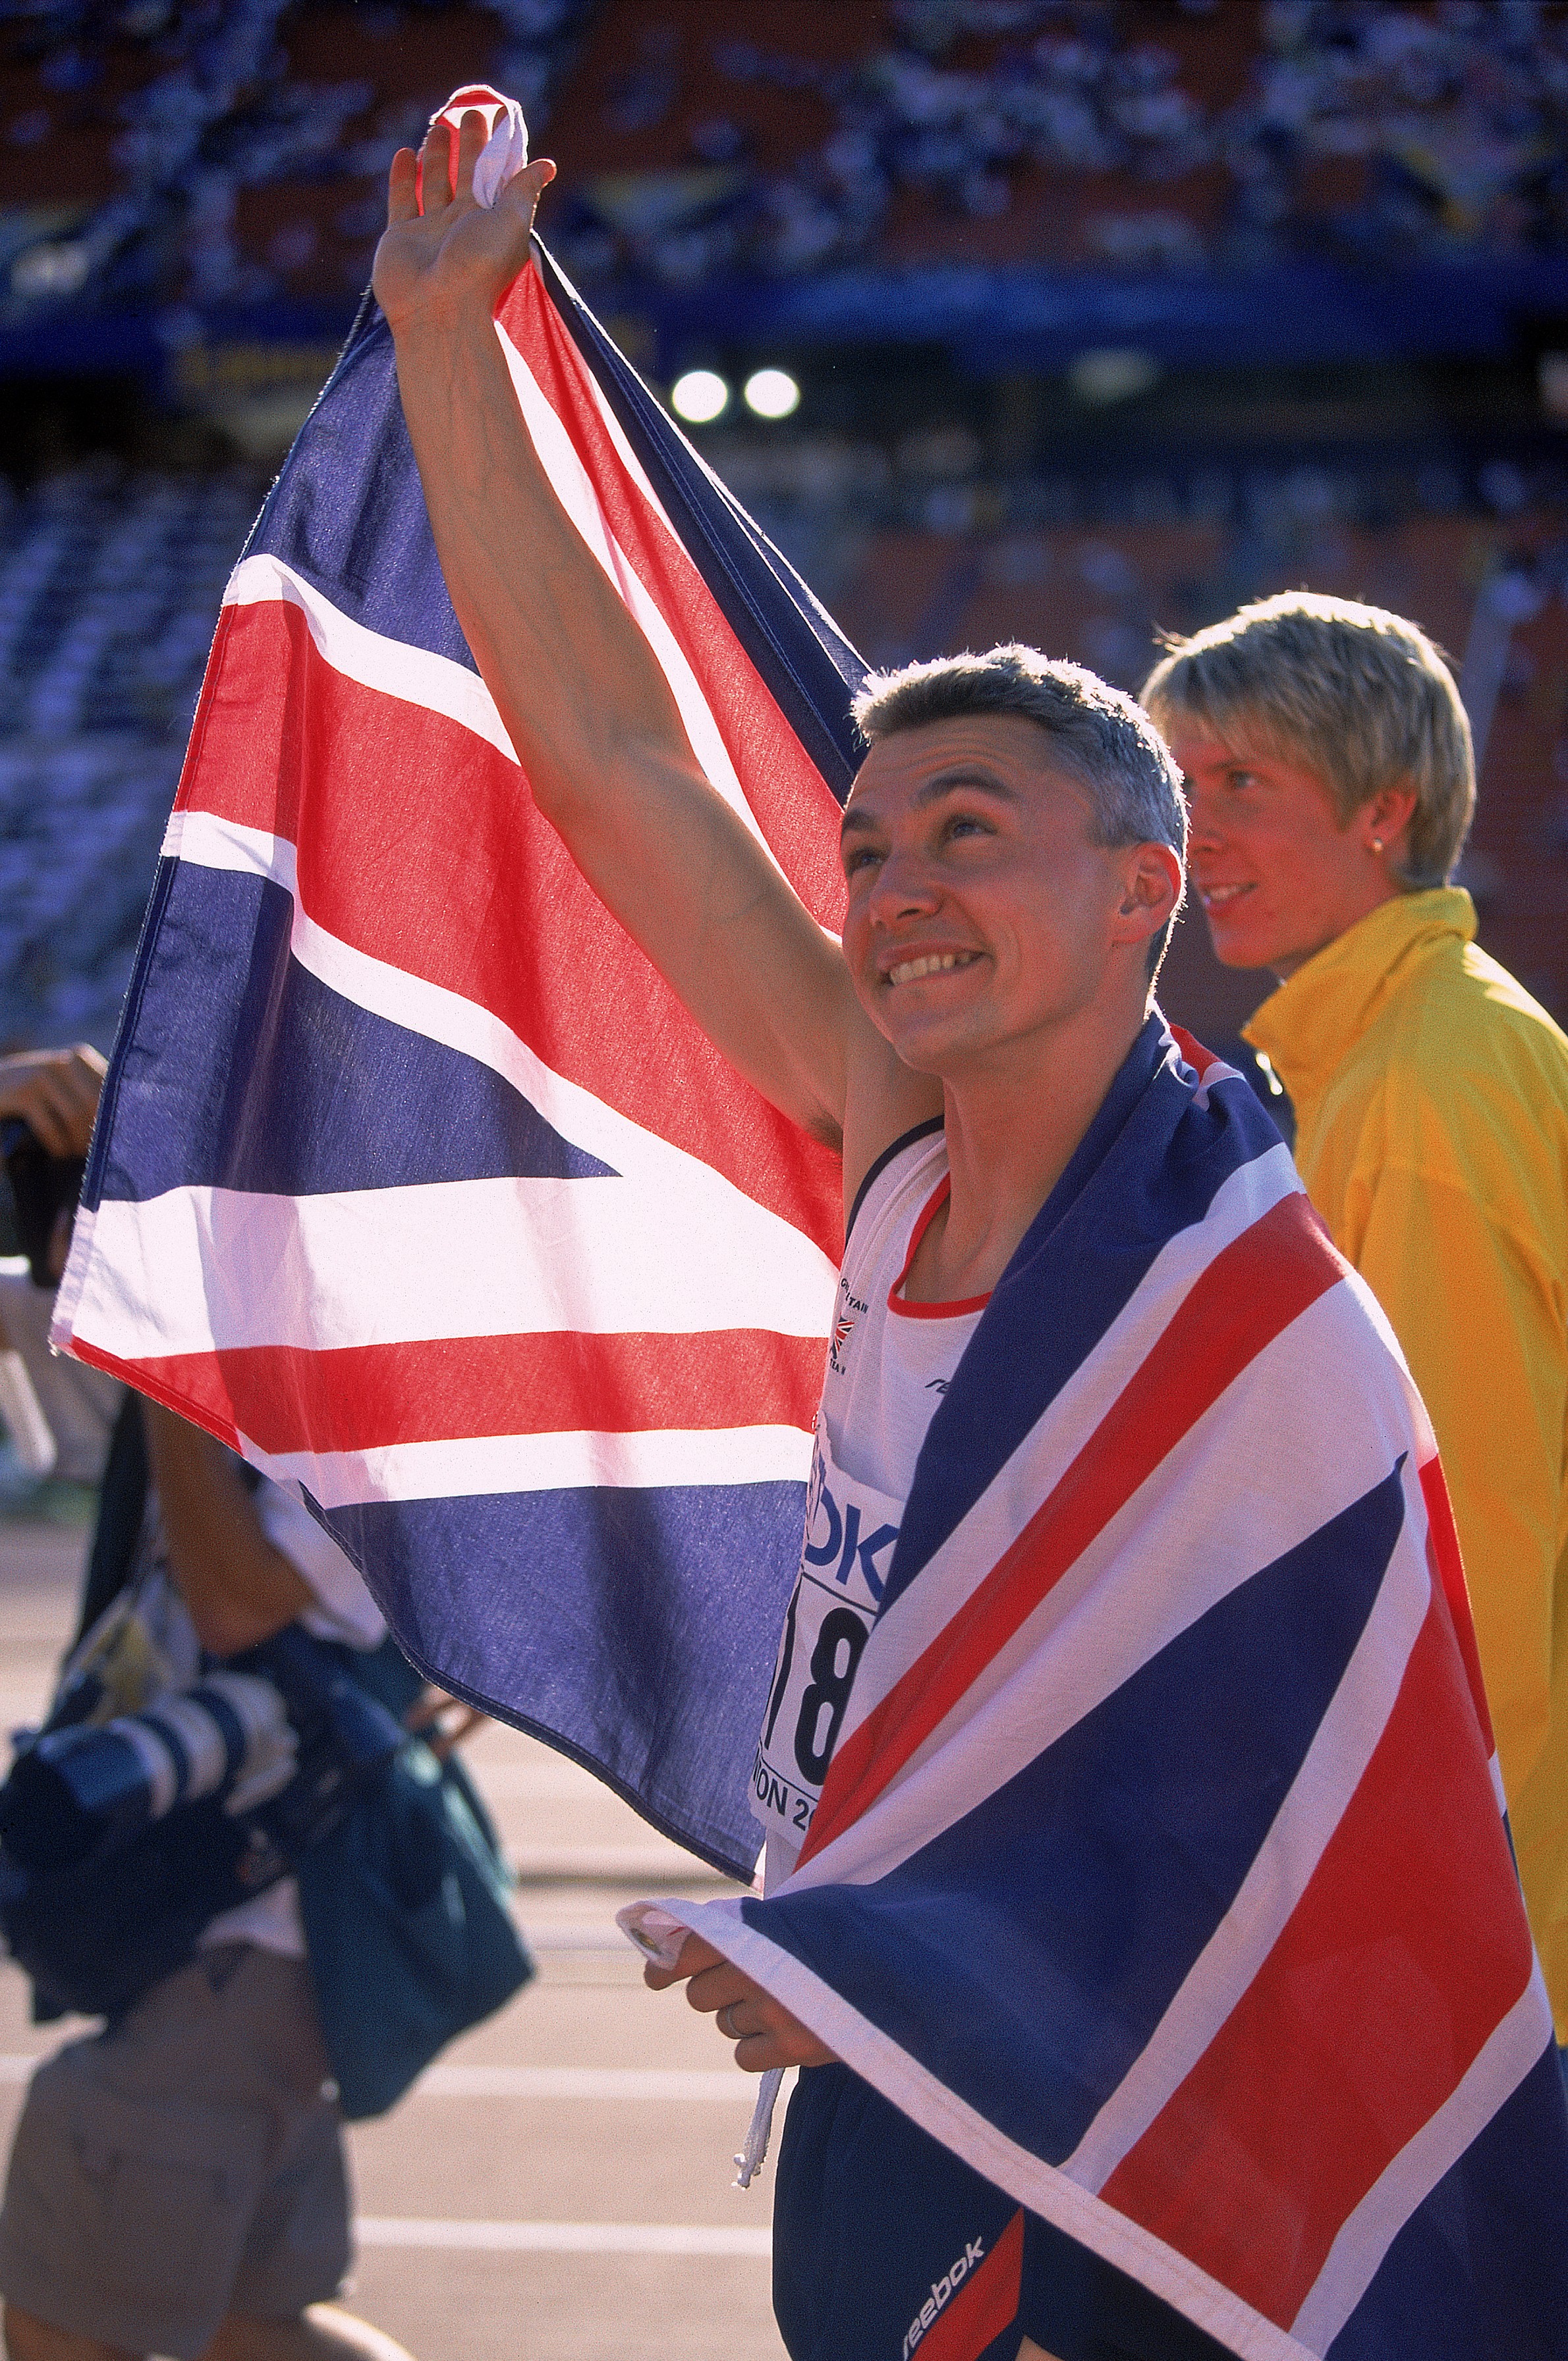 6 Aug 2001:  Jonathan Edwards of Great Britian celebrates during the Men's Triple Jump Event for the IAAF World Championships at the Commonwealth Stadium in Edmonton, Alberta, Canada.Mandatory Credit: Adam Pretty/AUS  /Allsport